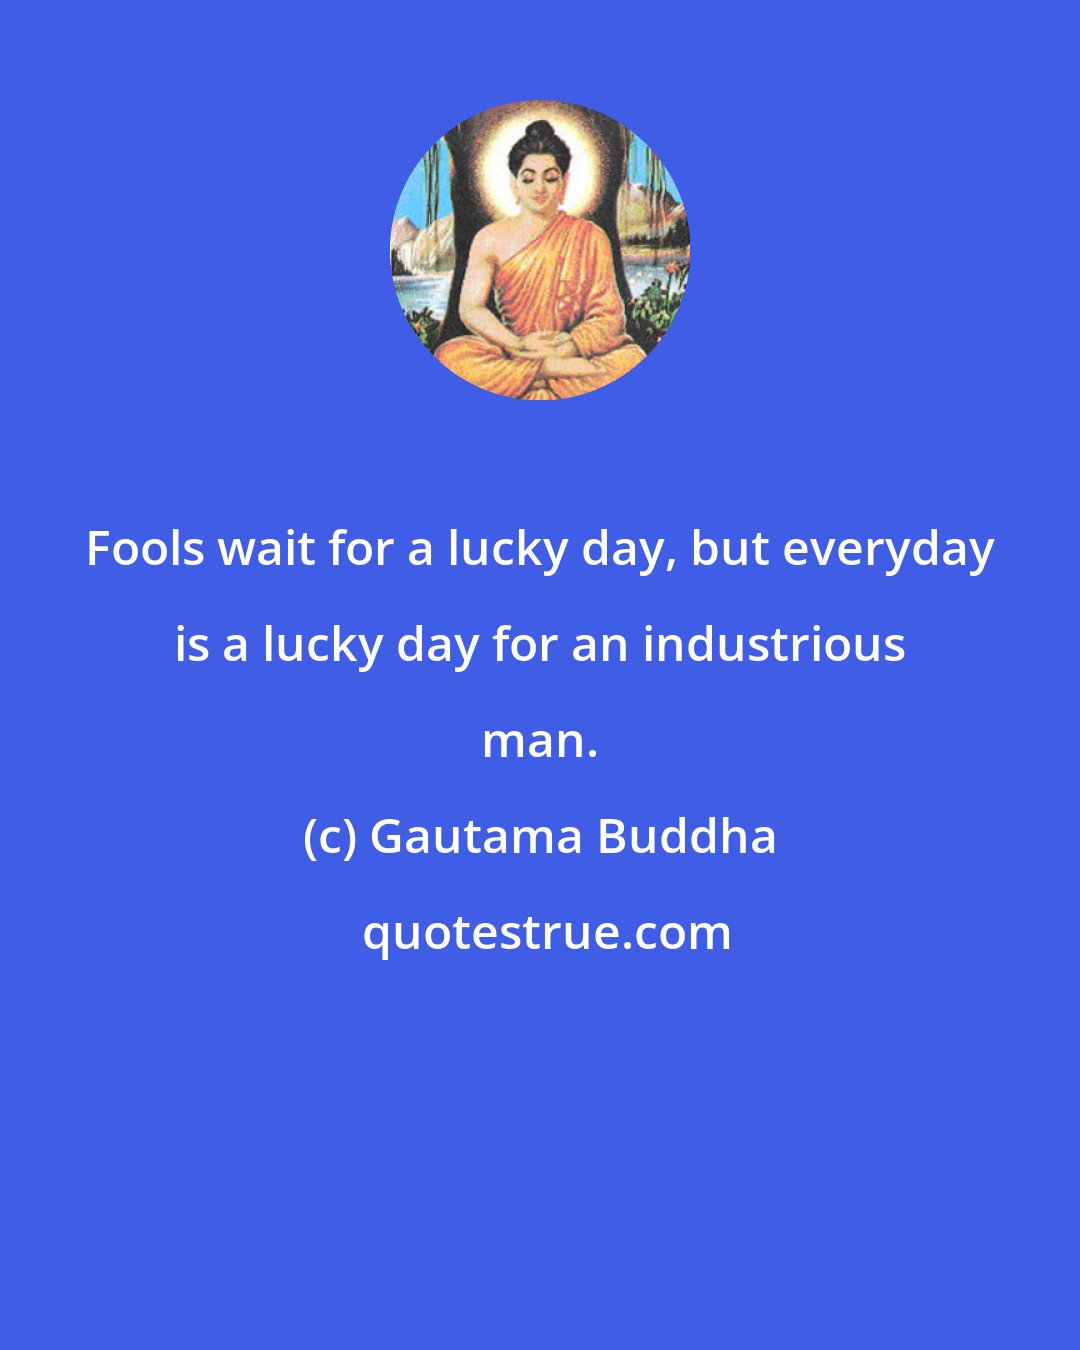 Gautama Buddha: Fools wait for a lucky day, but everyday is a lucky day for an industrious man.